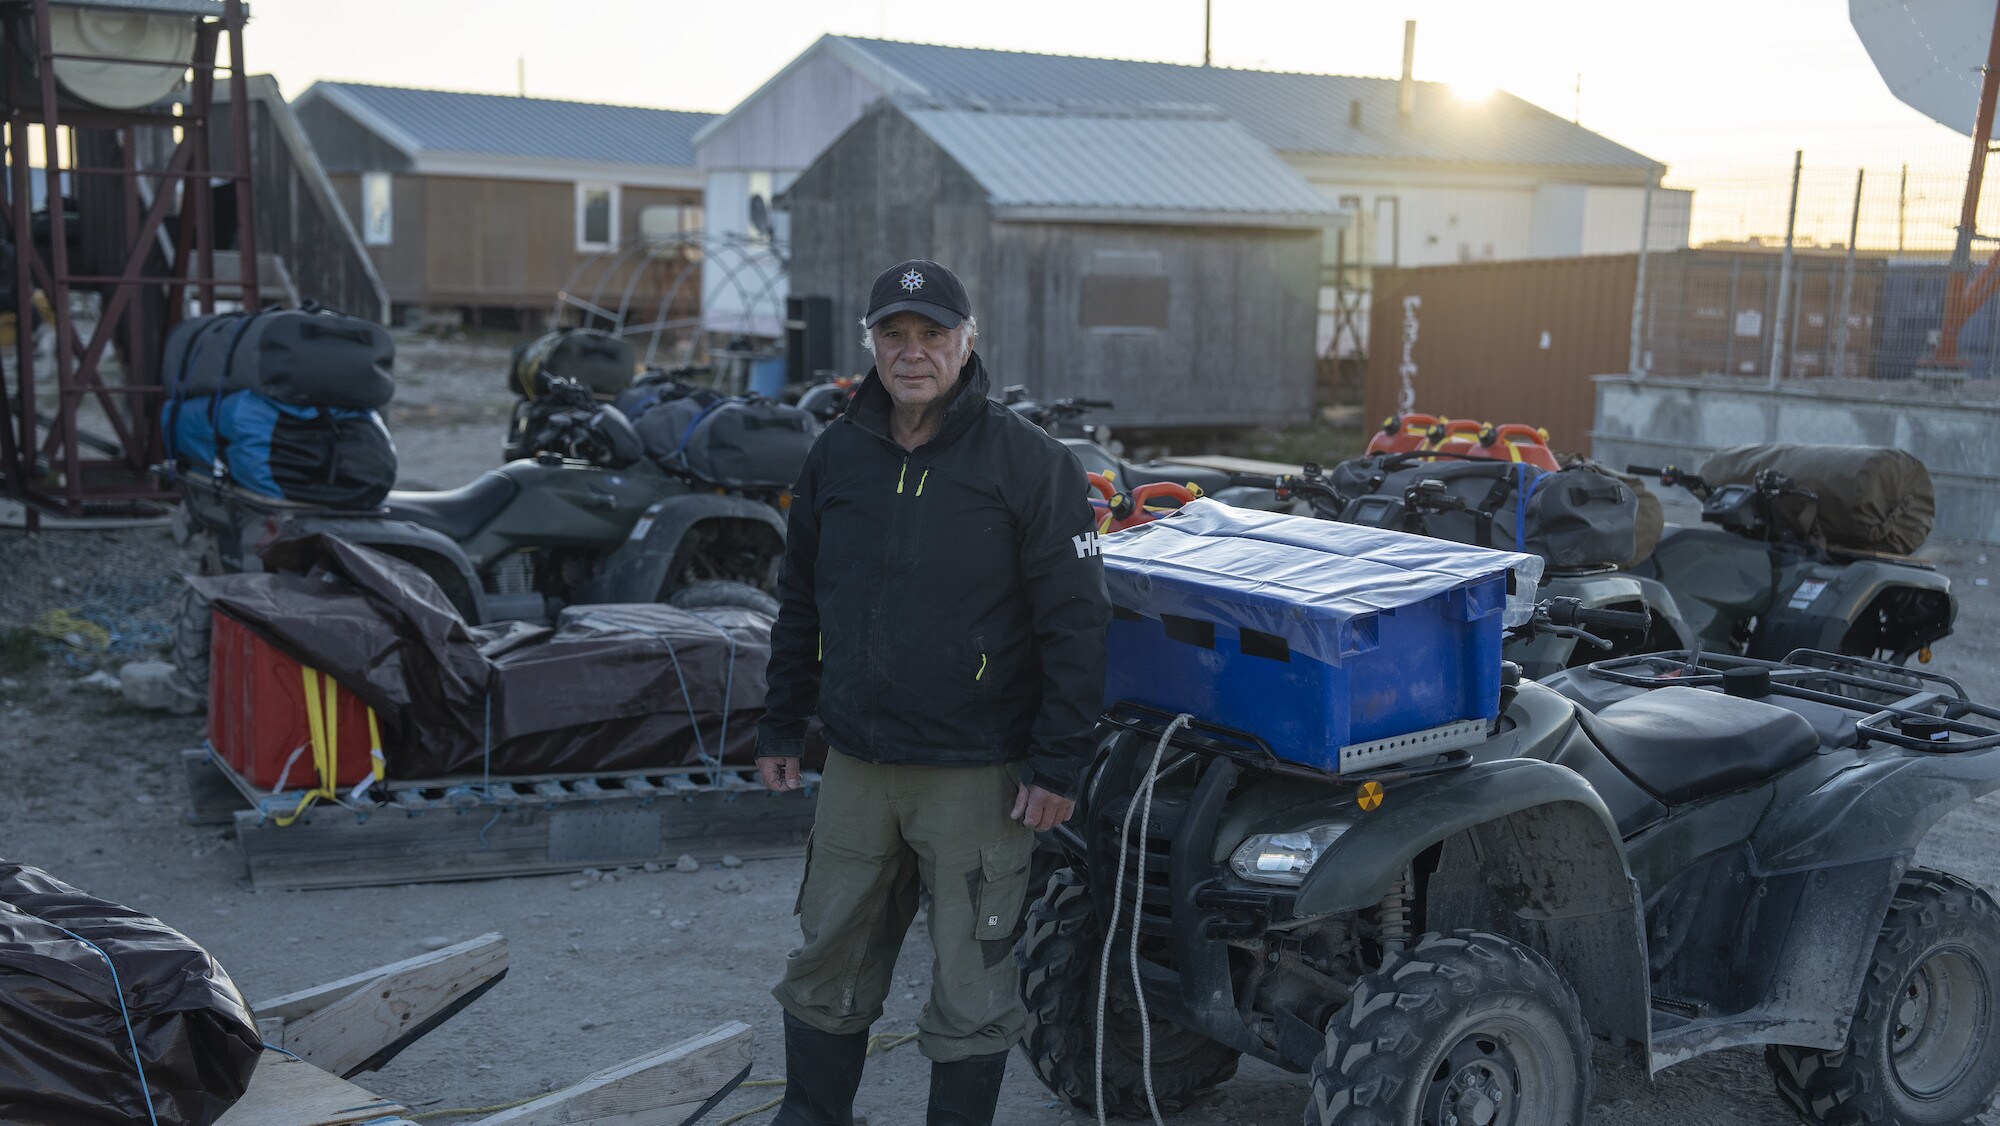 Franklin historian Tom Gross stands among ATVs in Gjoa Haven, Nunavut, Canada. He is preparing to journey across King William Island to in search of Sir John Franklin's lost tomb. (National Geographic/Renan Ozturk)